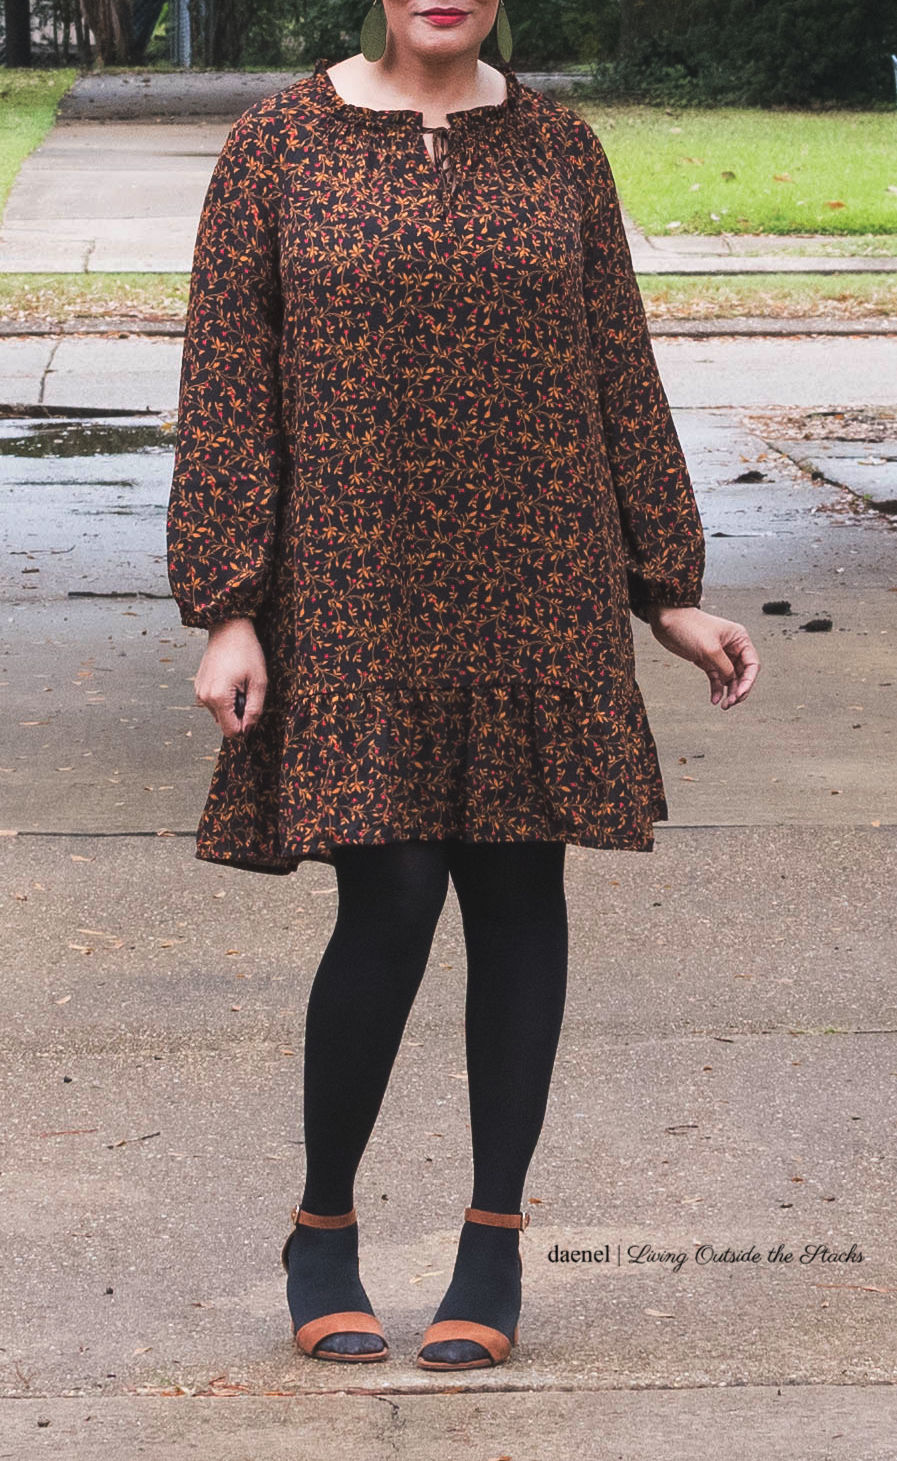 Black Floral Dress Black Tights and Brown Sandals {living outside the stacks} #StyleImitatingArt